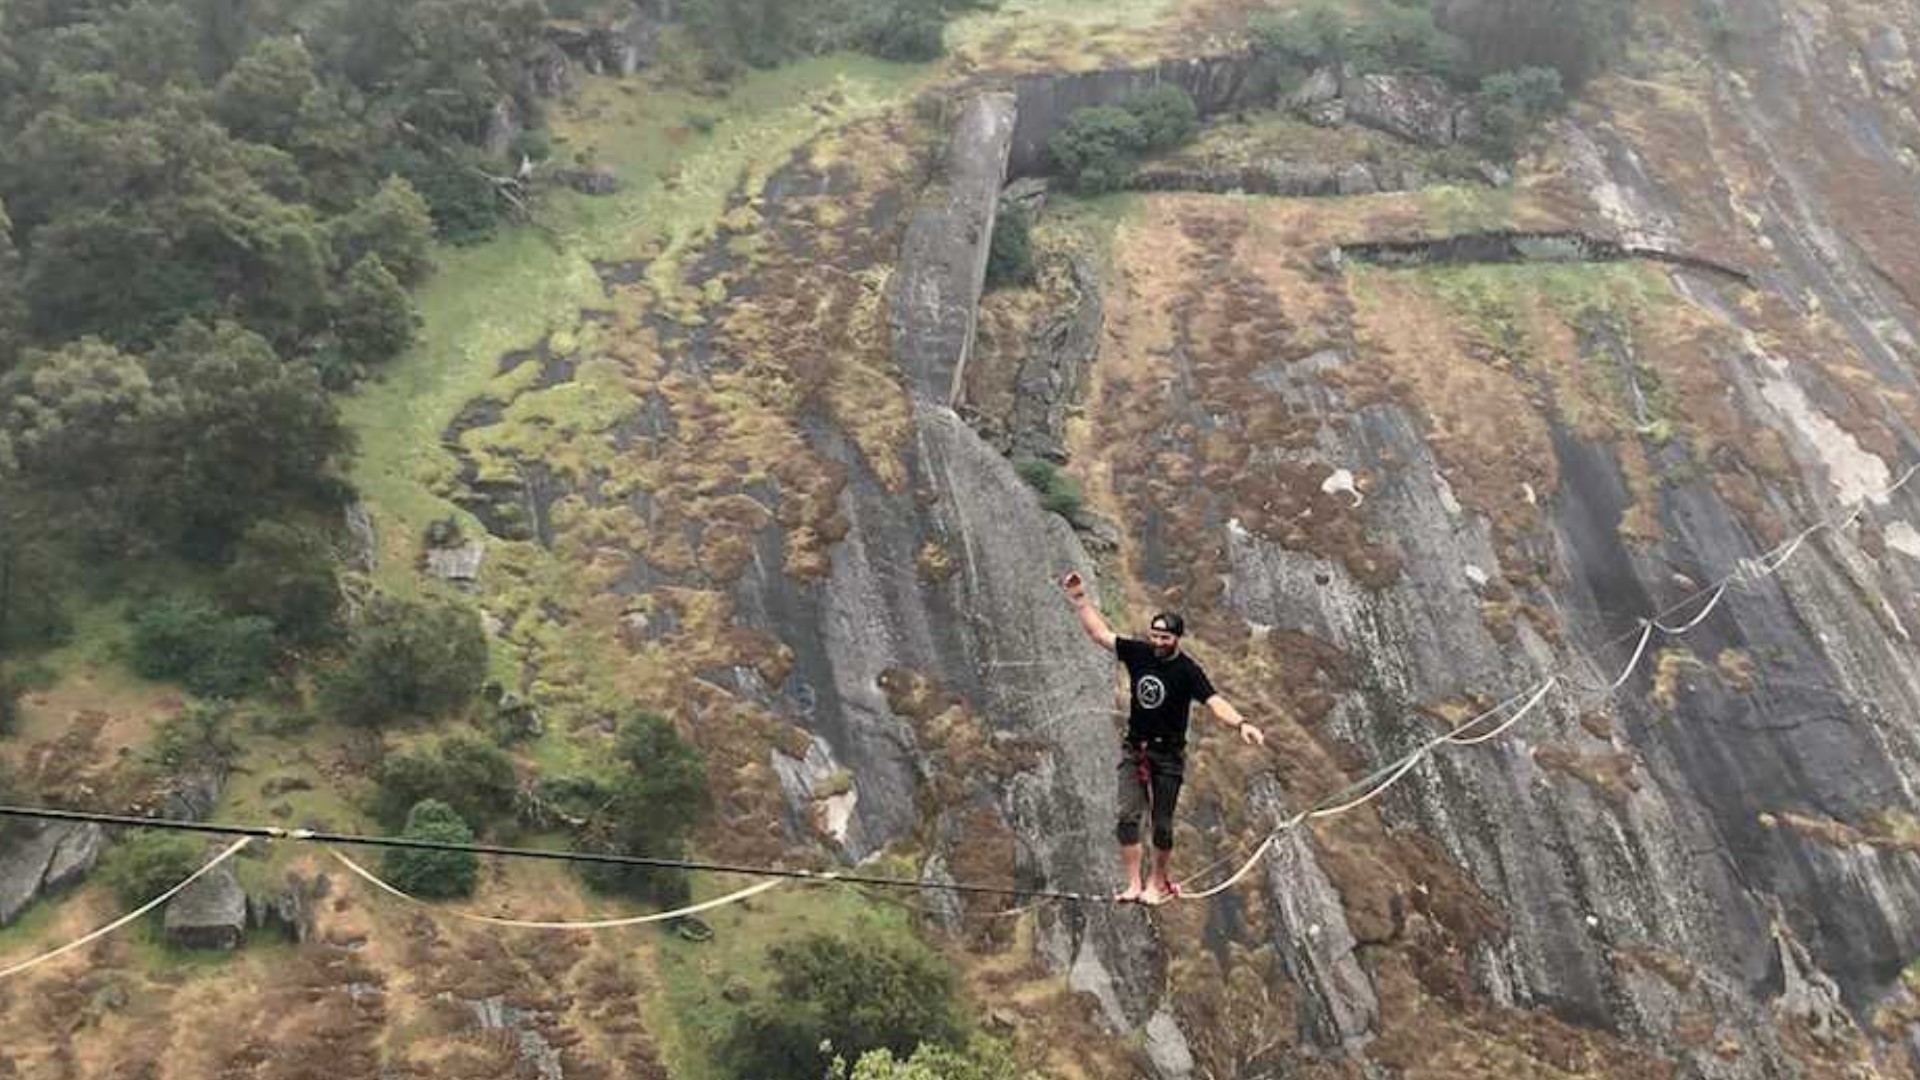 Ryan Robinson plans to walk more than 1,900 feet on a 1-inch-wide rope across the American River, from Natomas Crossing to Rainbow Bridge in Folsom.